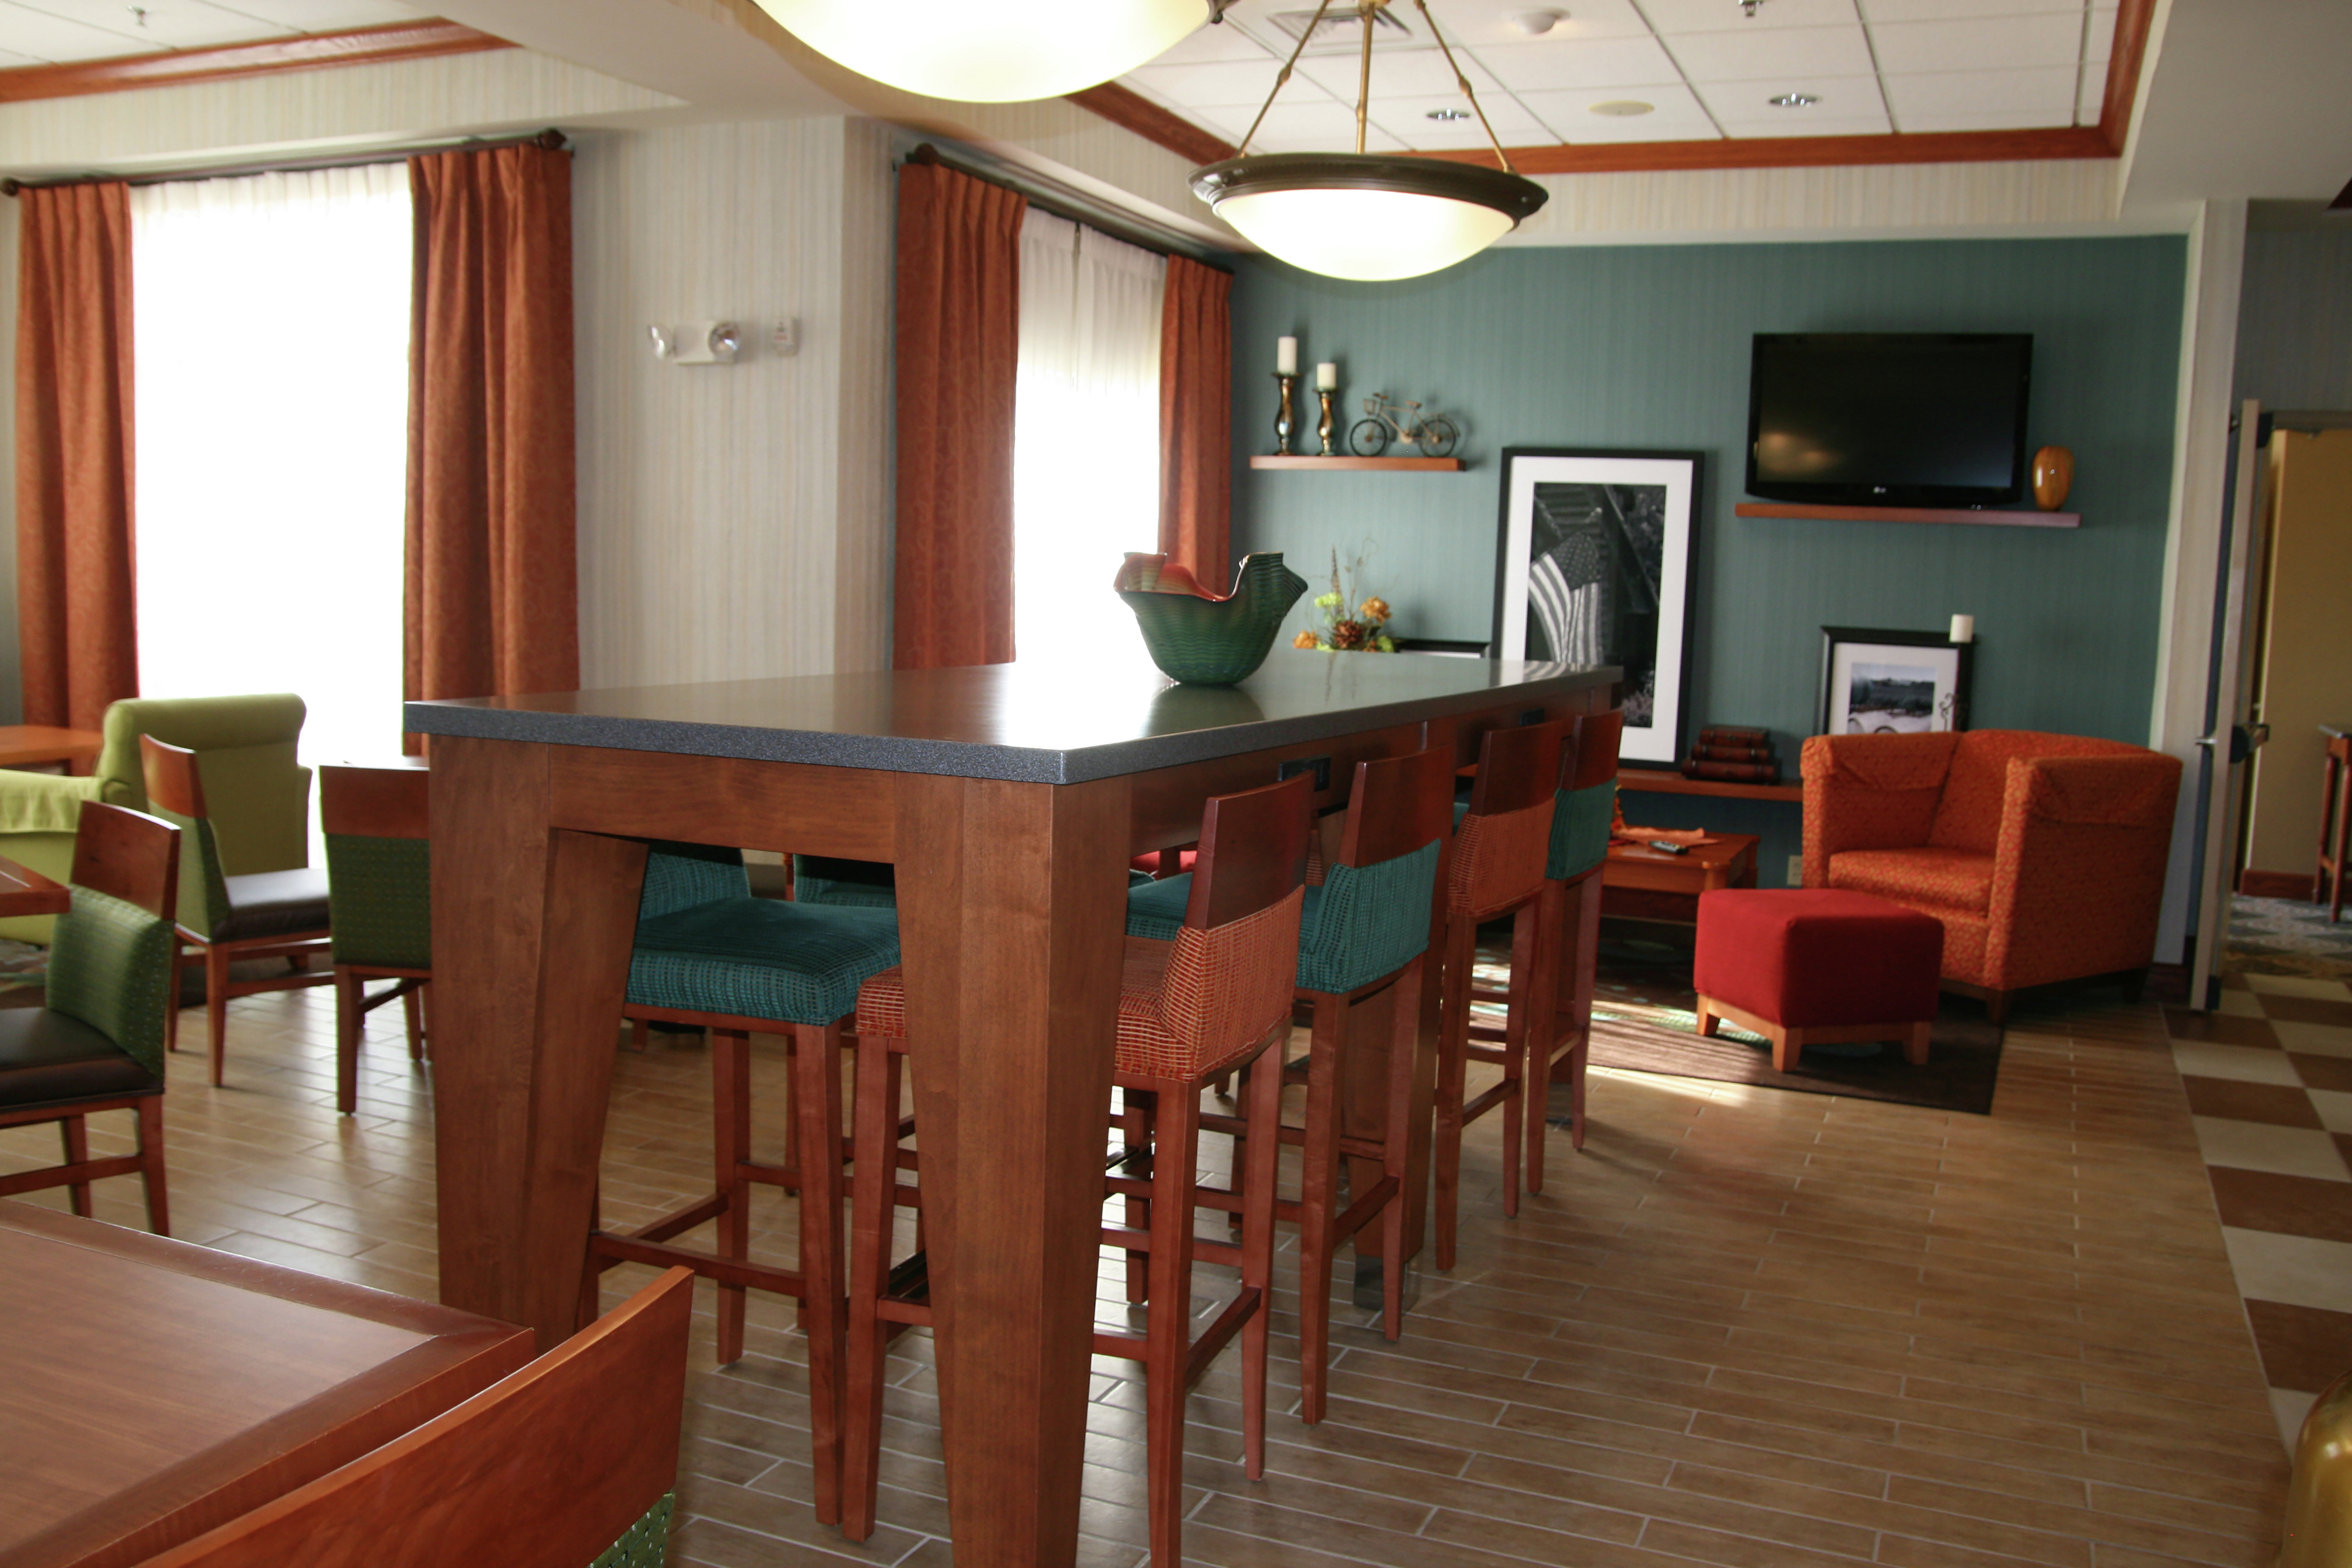 Lobby Lounge and Breakfast Seating Area